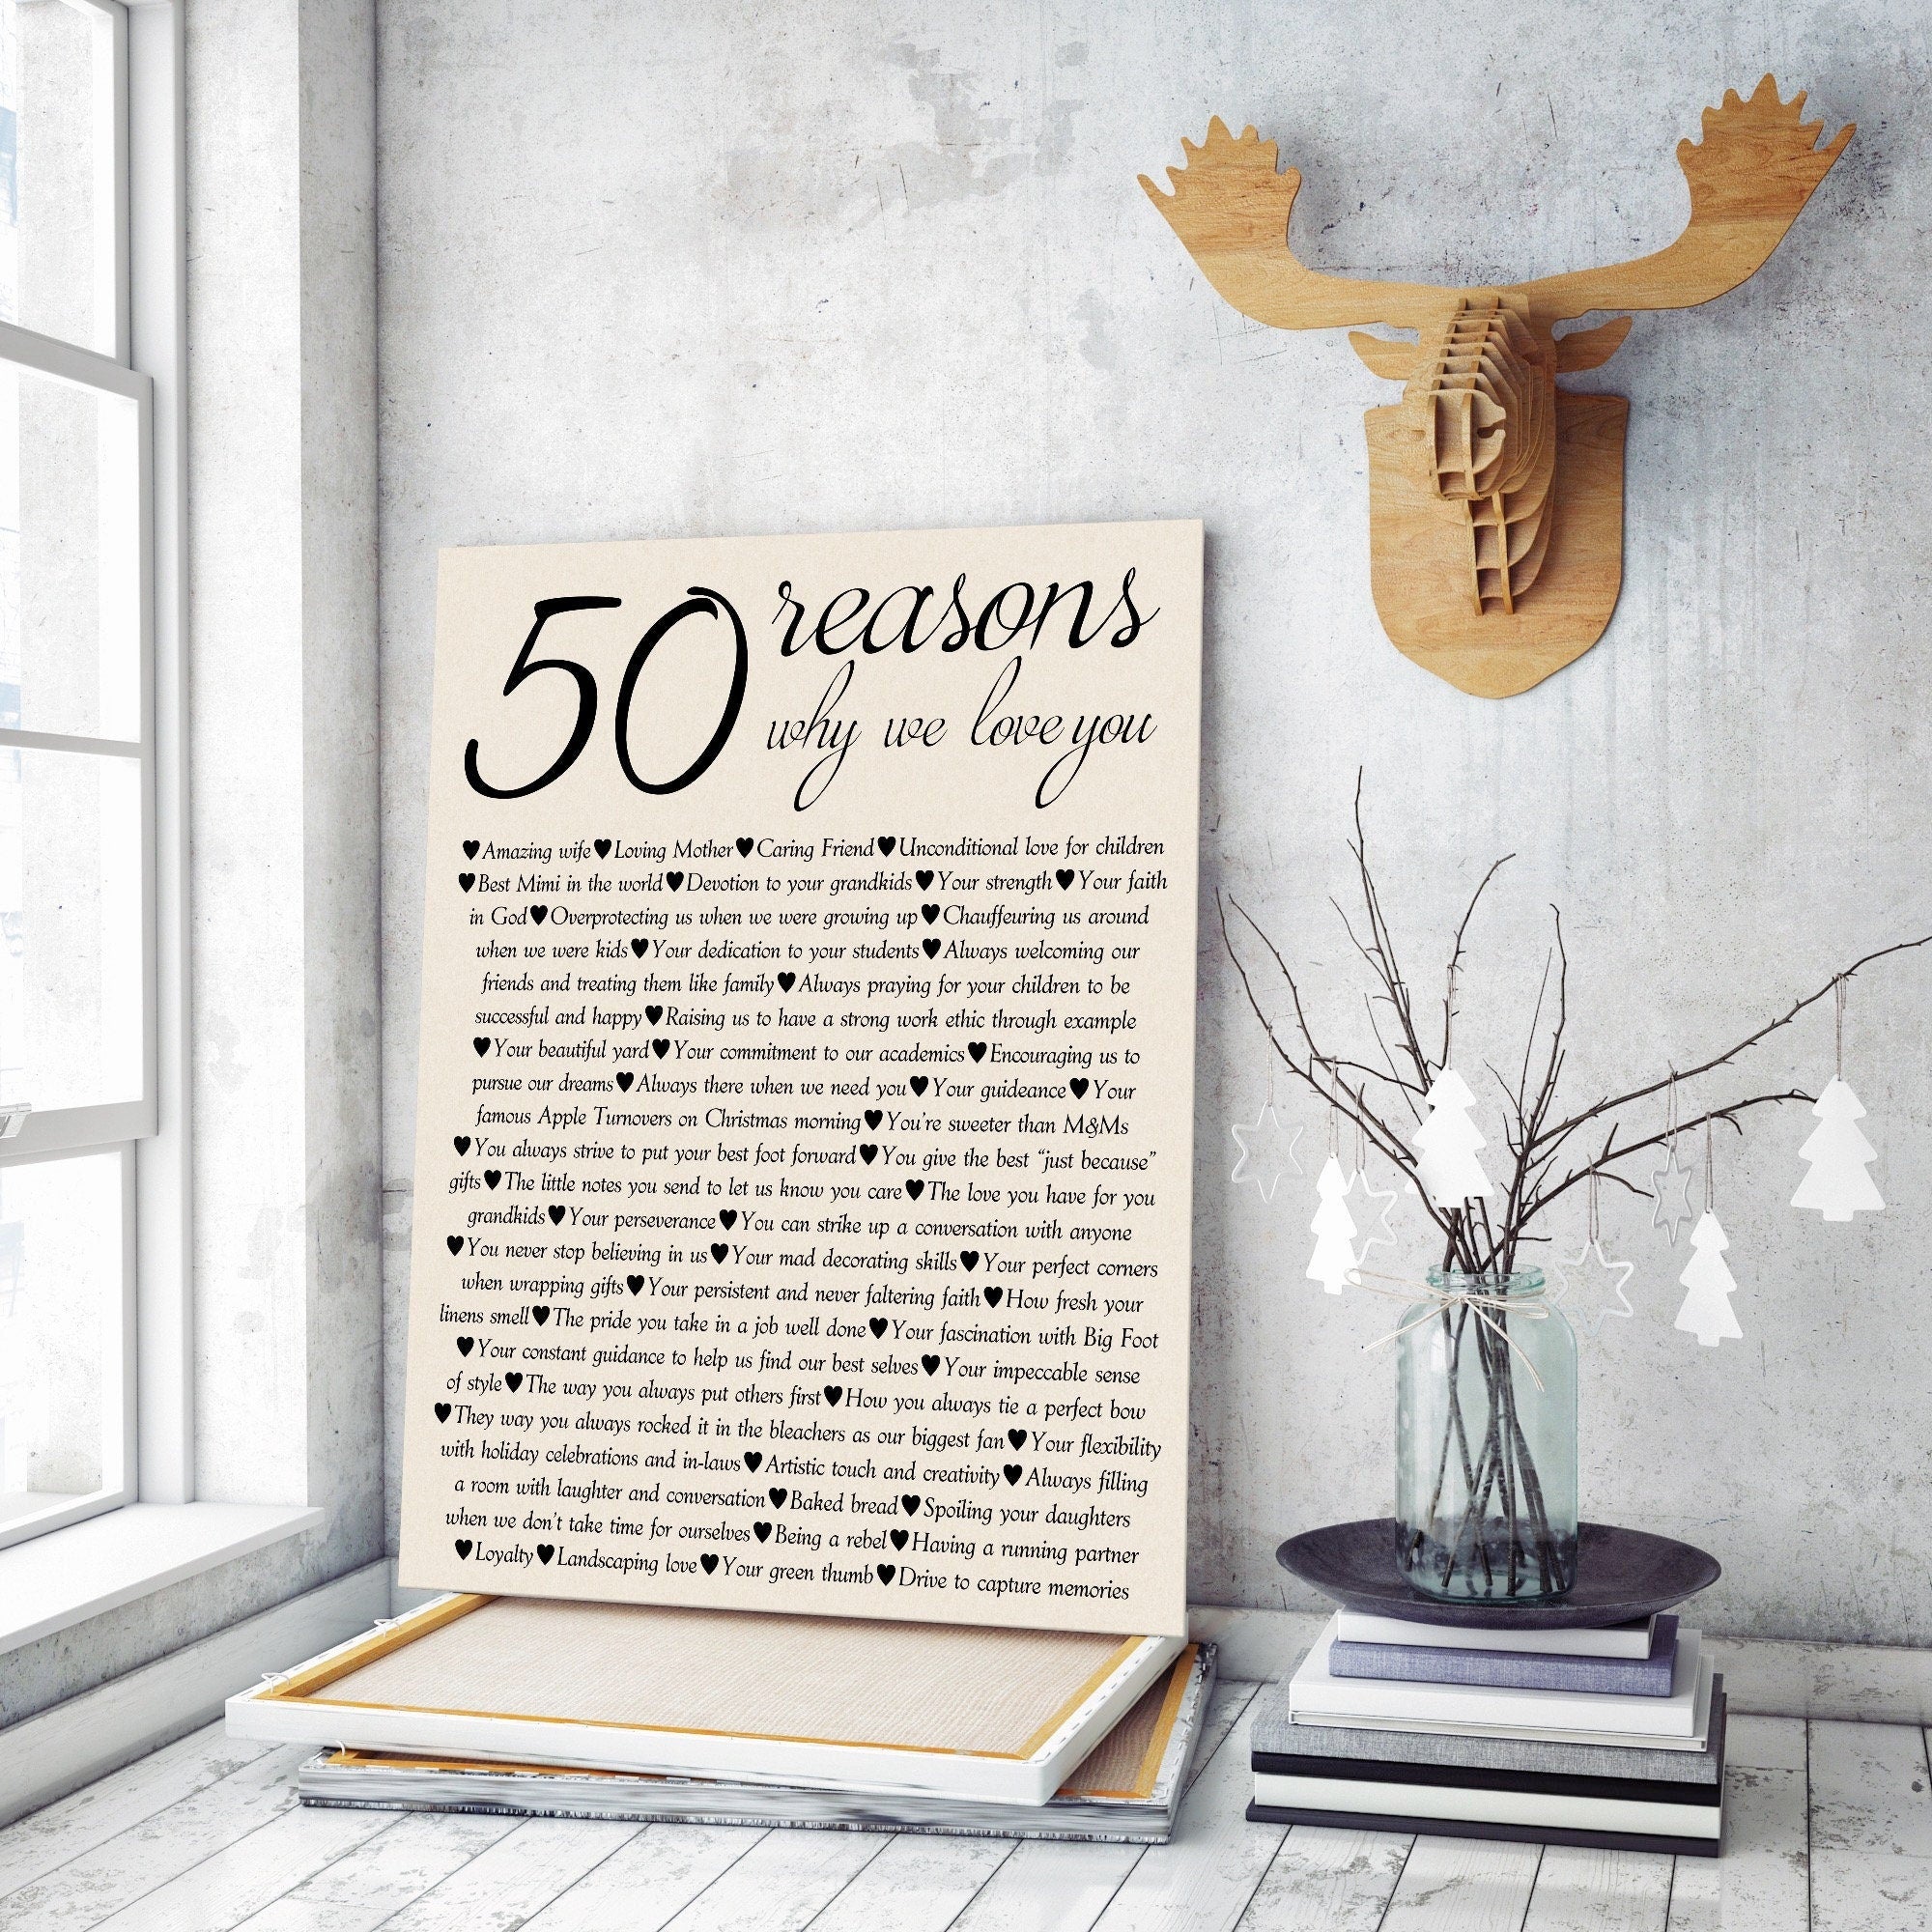 50th Birthday Gift Idea - 50 Reasons To Do What I Want - 50 Years